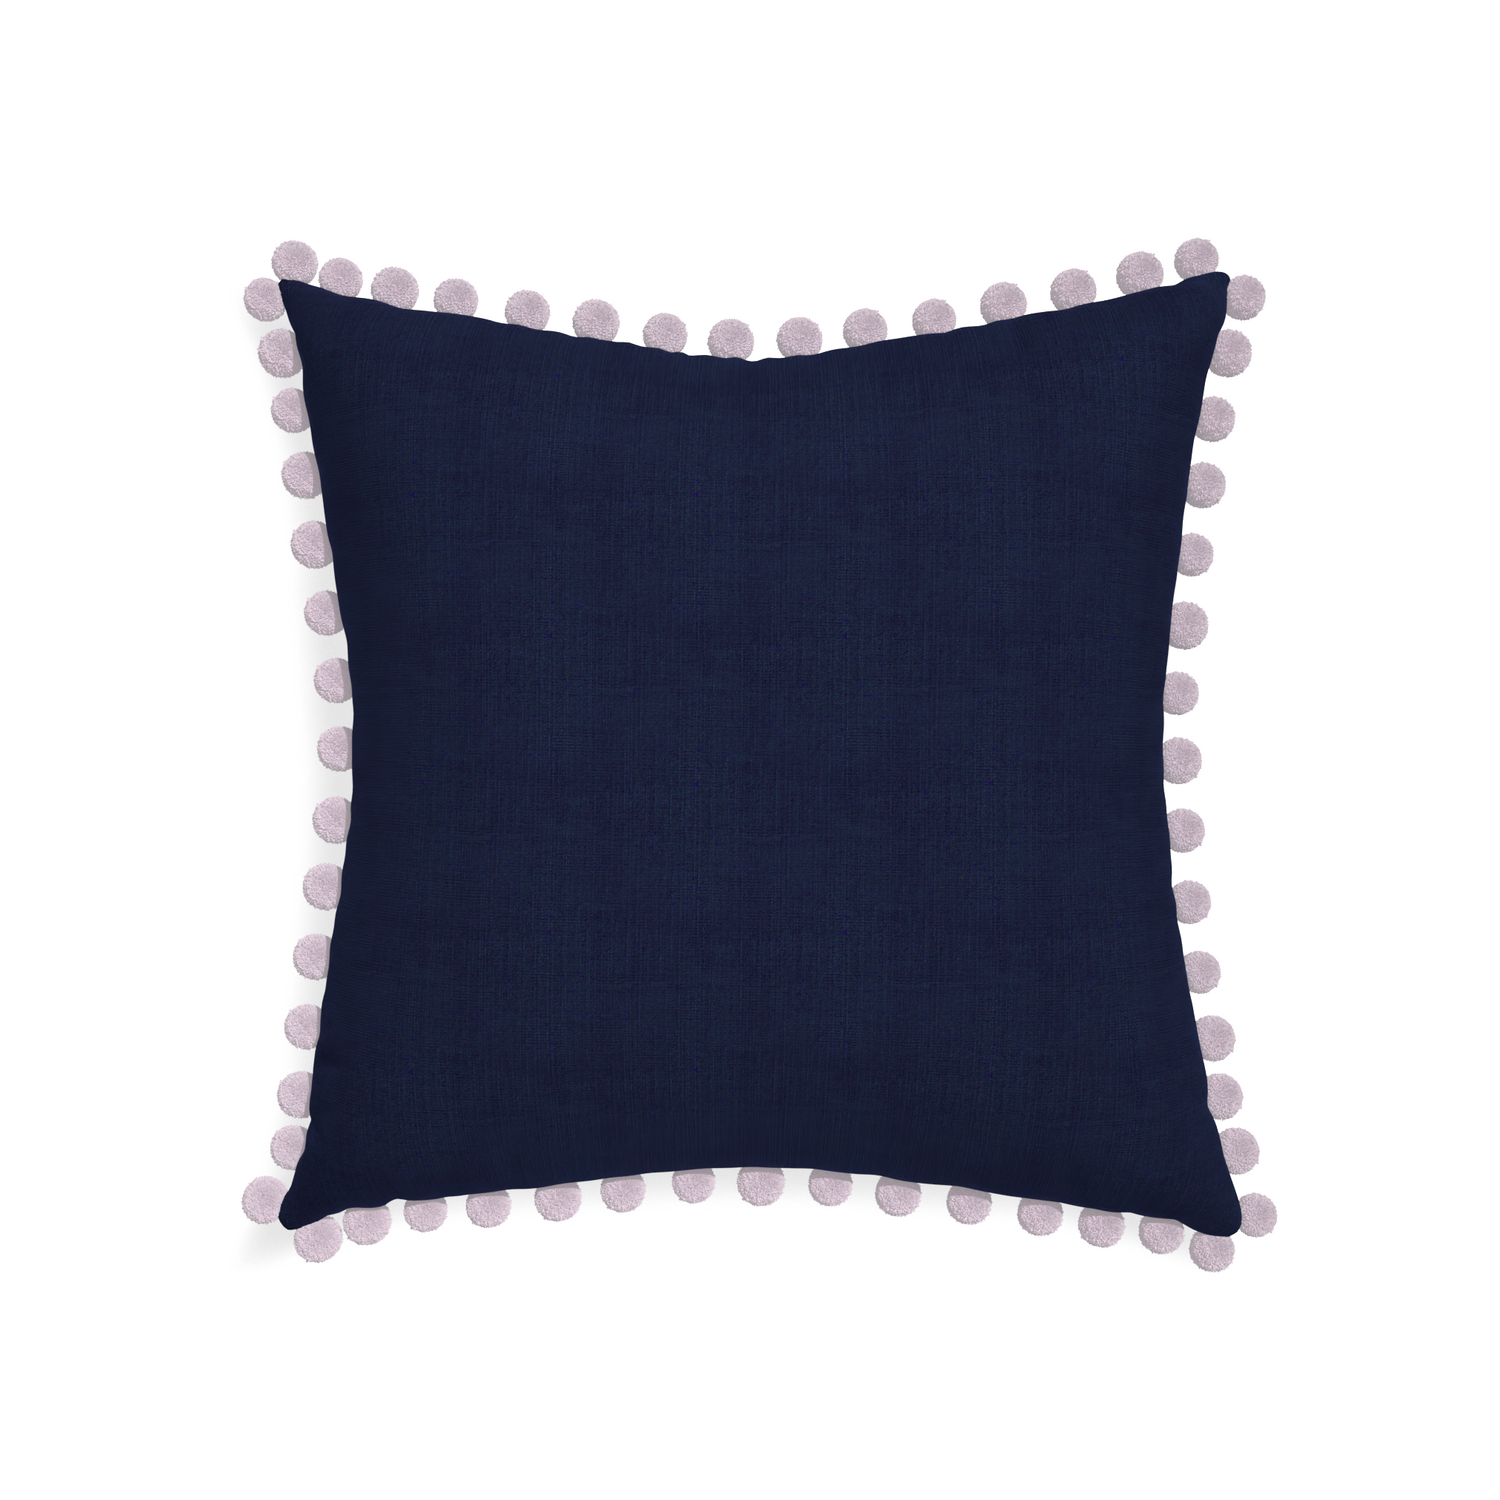 22-square midnight custom navy bluepillow with l on white background